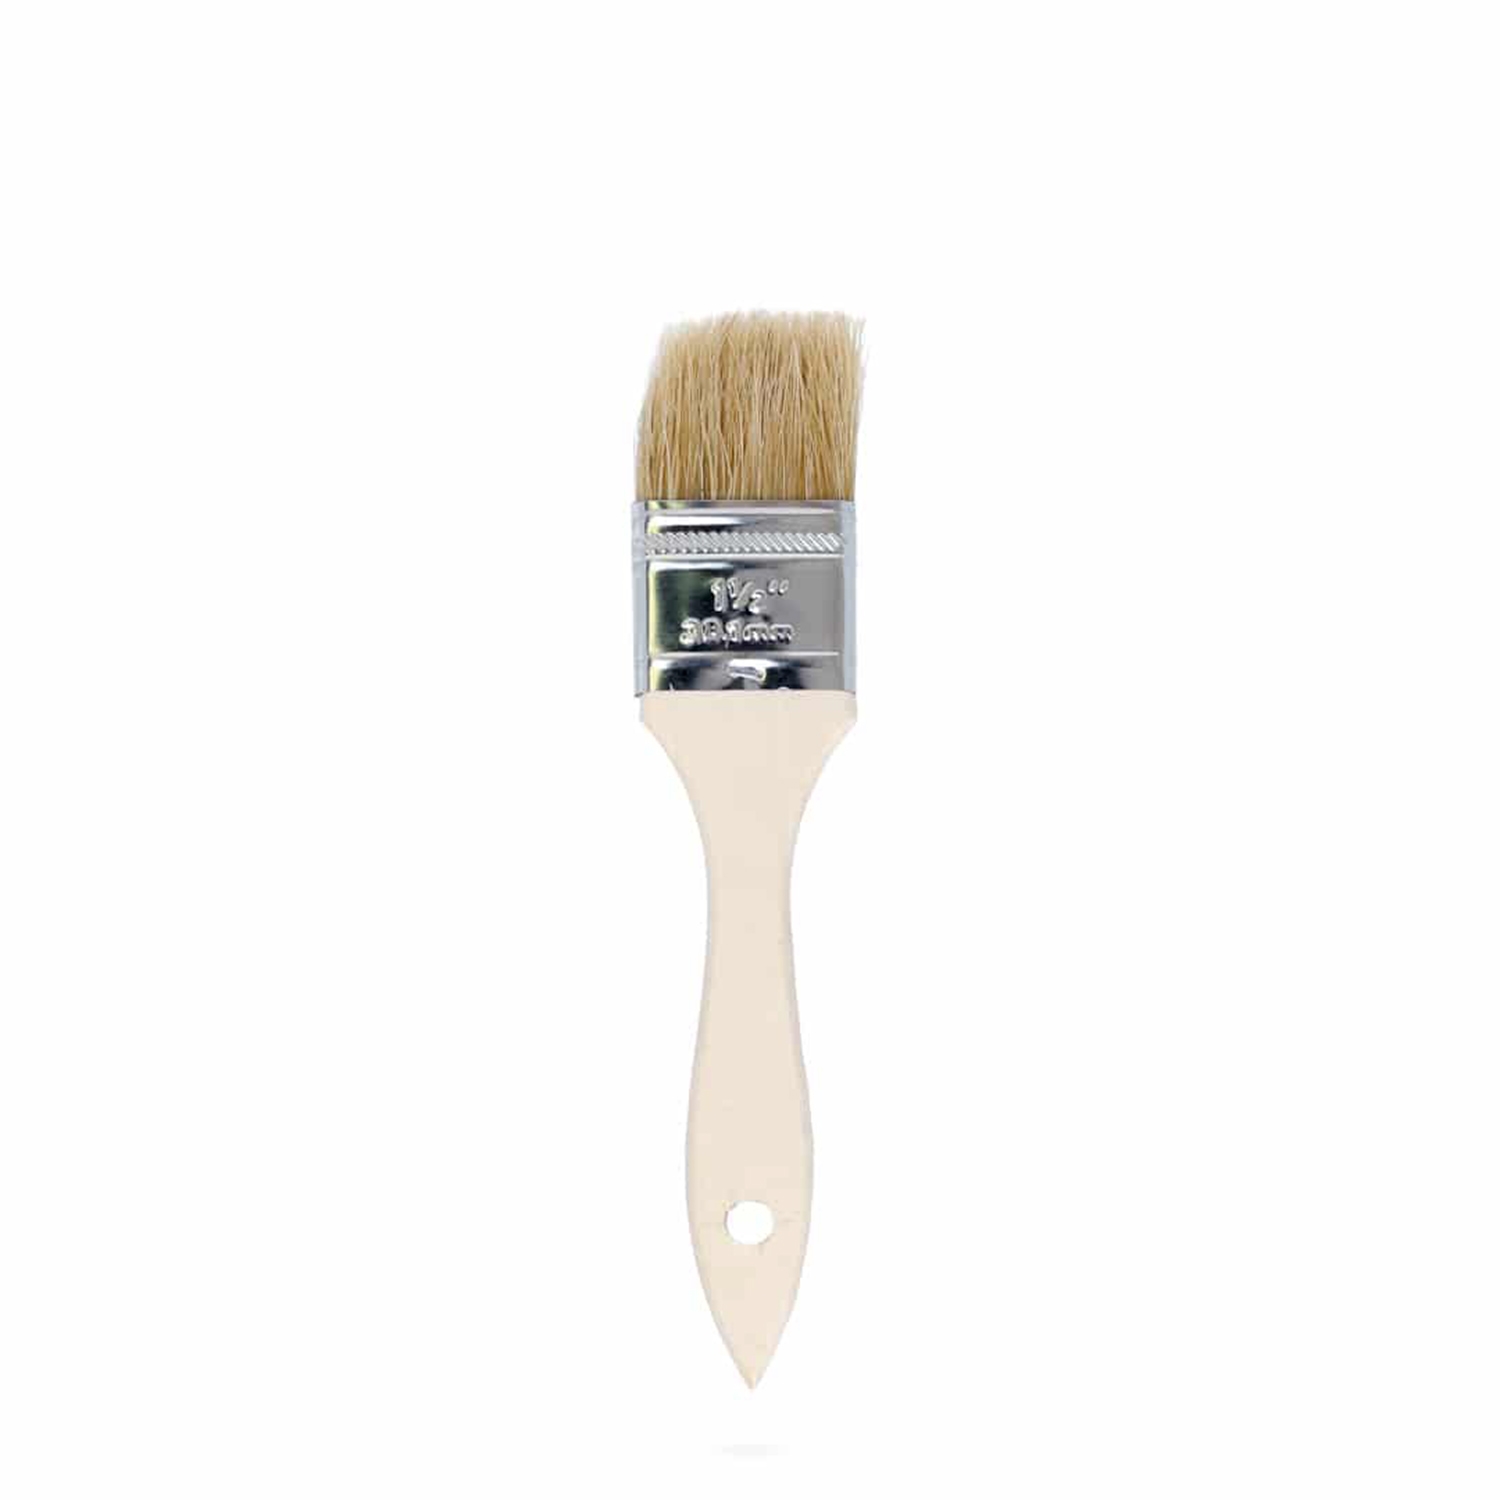 1.5 Wide Utility Brush for Paint or Glaze